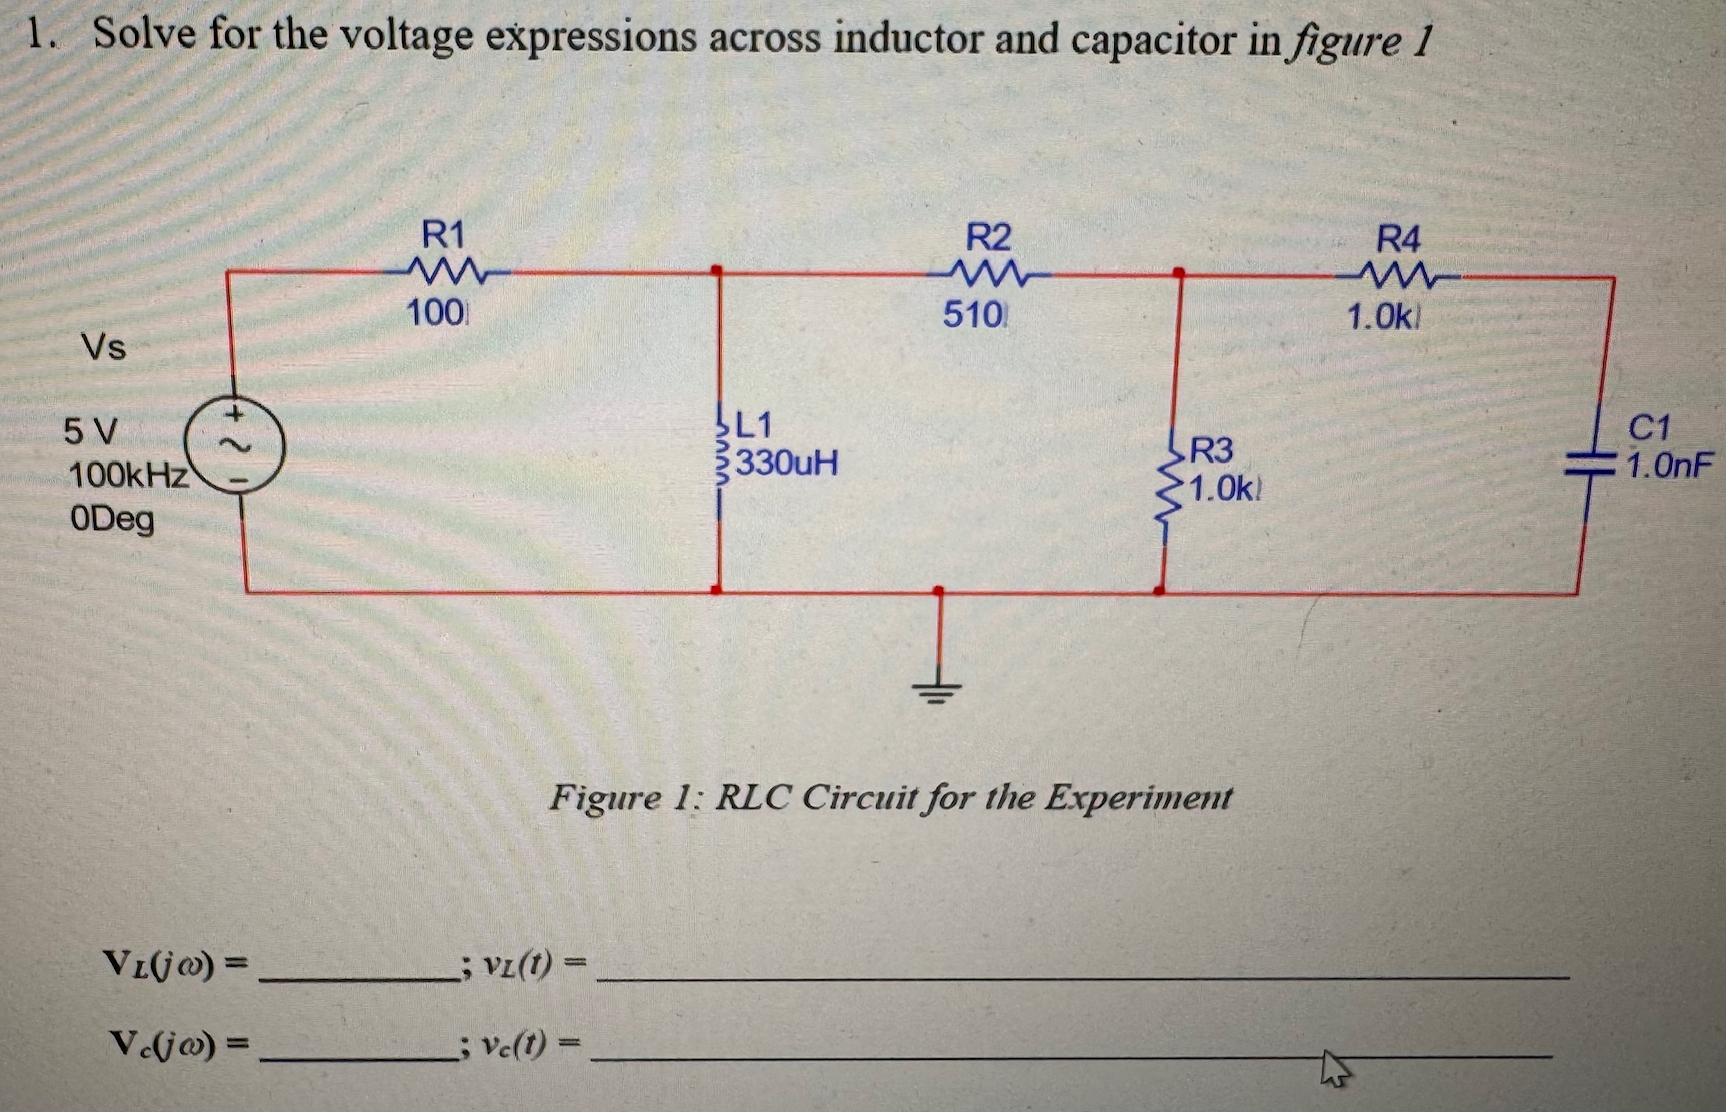 1. Solve for the voltage expressions across inductor and capacitor in figure 1 Vs 5 V 100kHz ODeg 2 VL(j)=